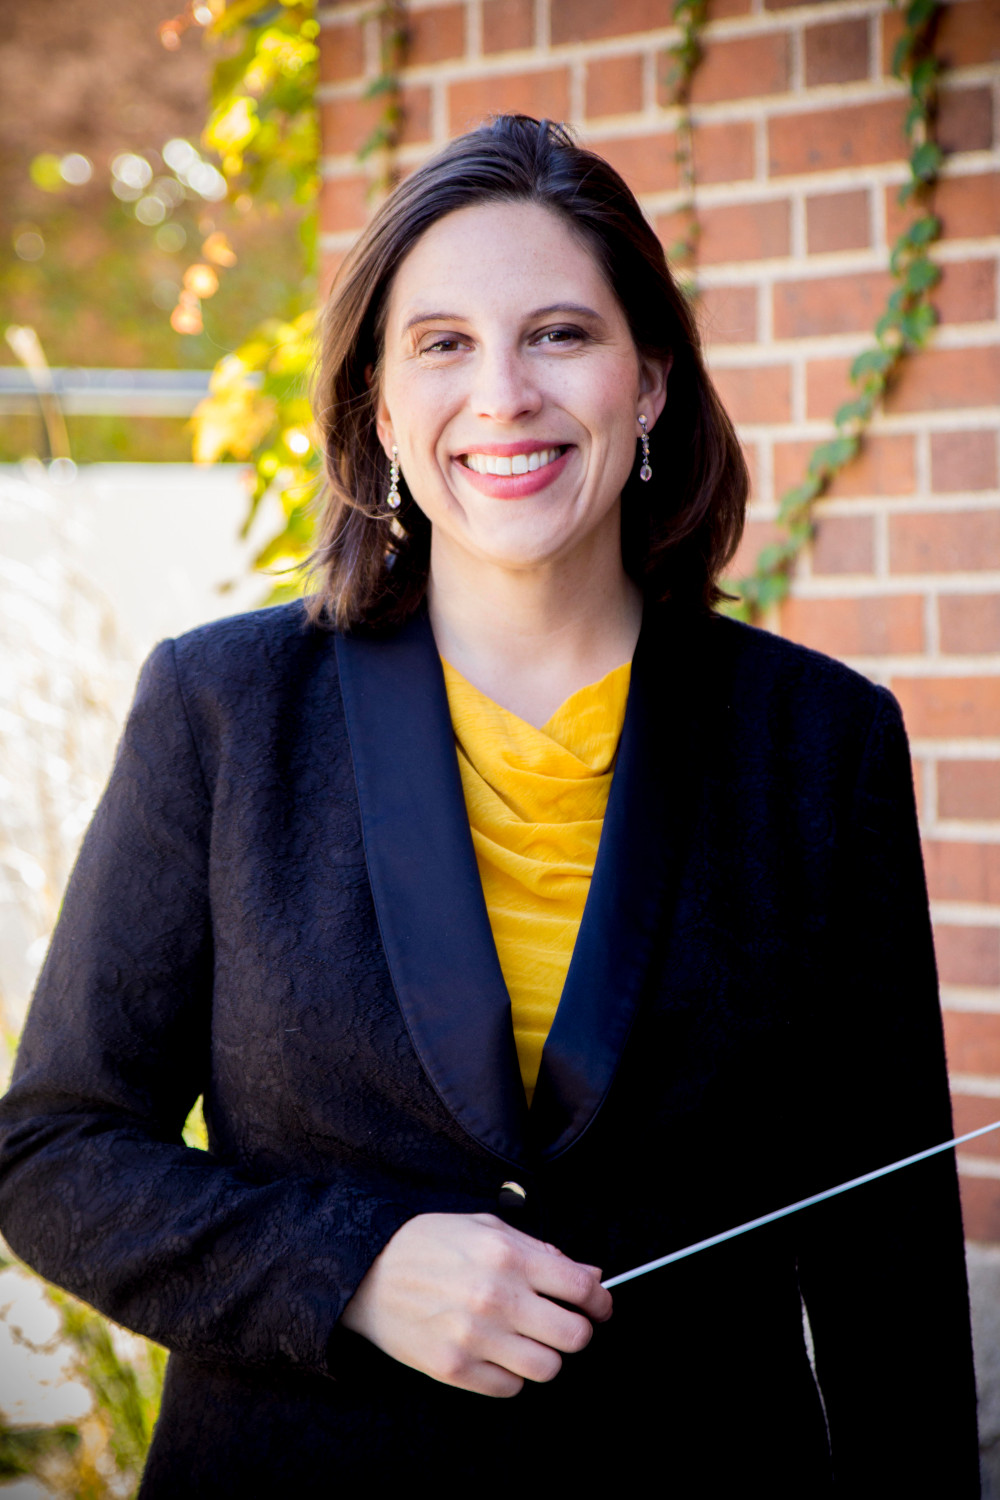 Image shows Seward Concert Band Director, Cassandra Bechard. Bechard is a white female wearing a dark suit and holding a baton.